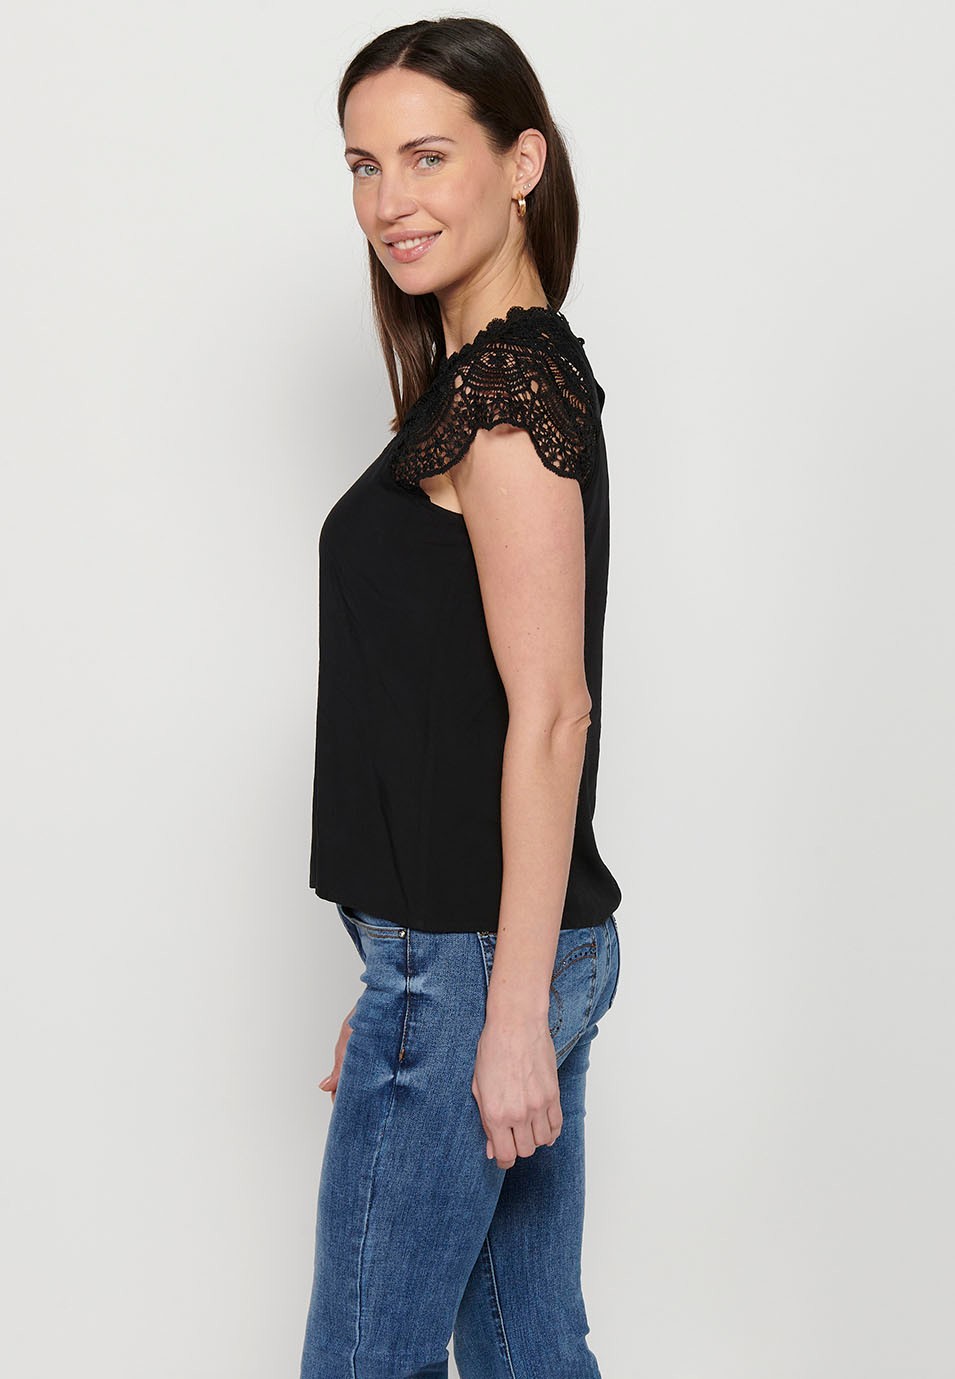 Sleeveless T-shirt, round neckline with lace, Black color for women